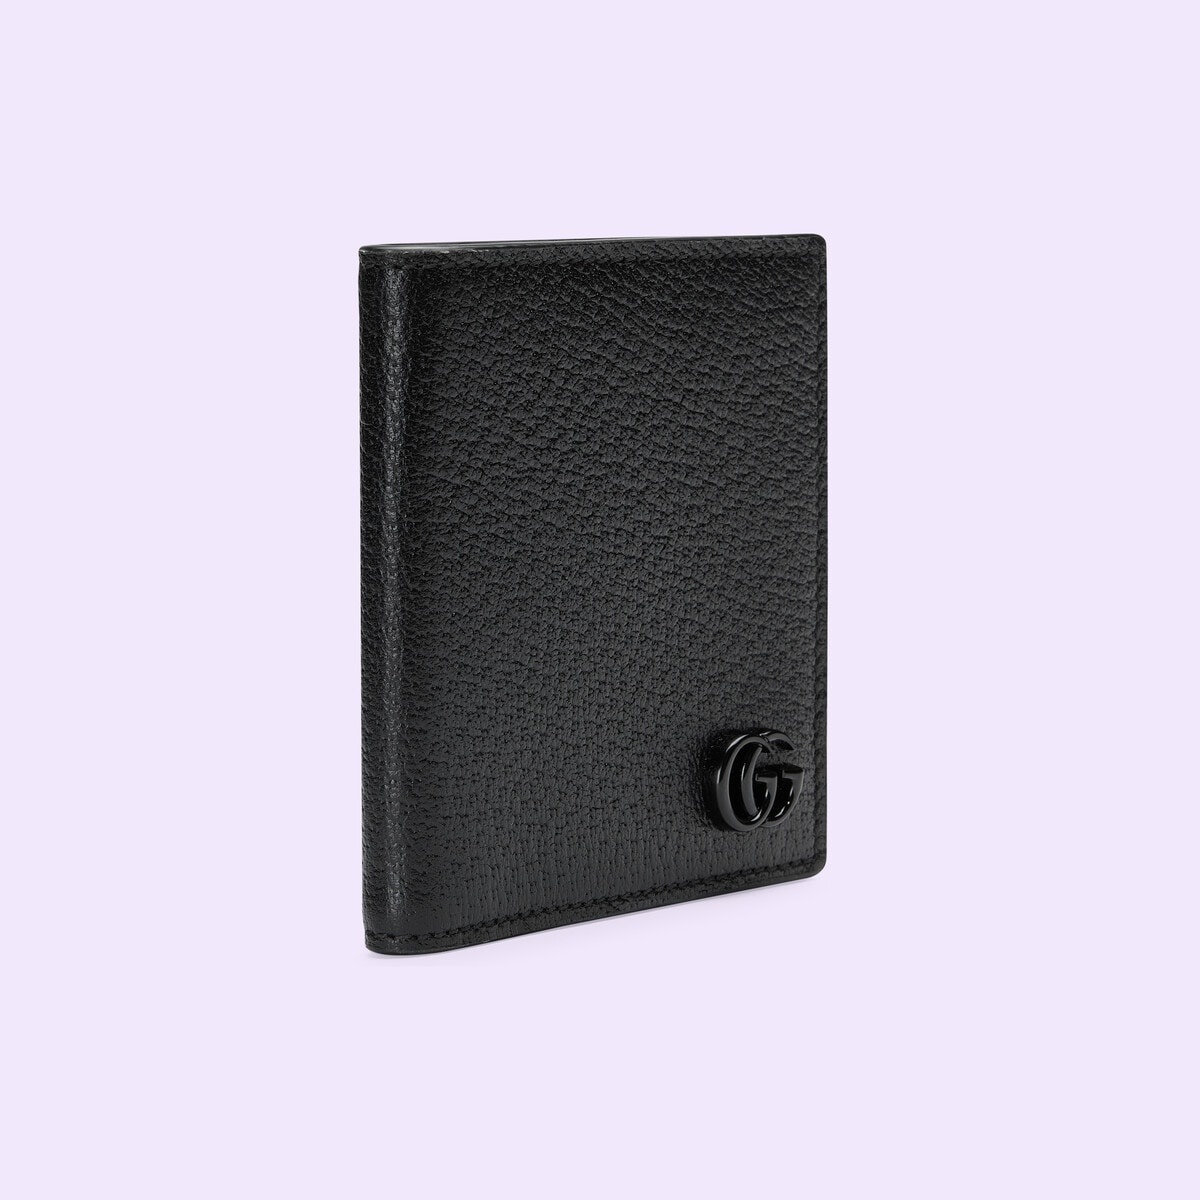 GG Marmont wallet - 3